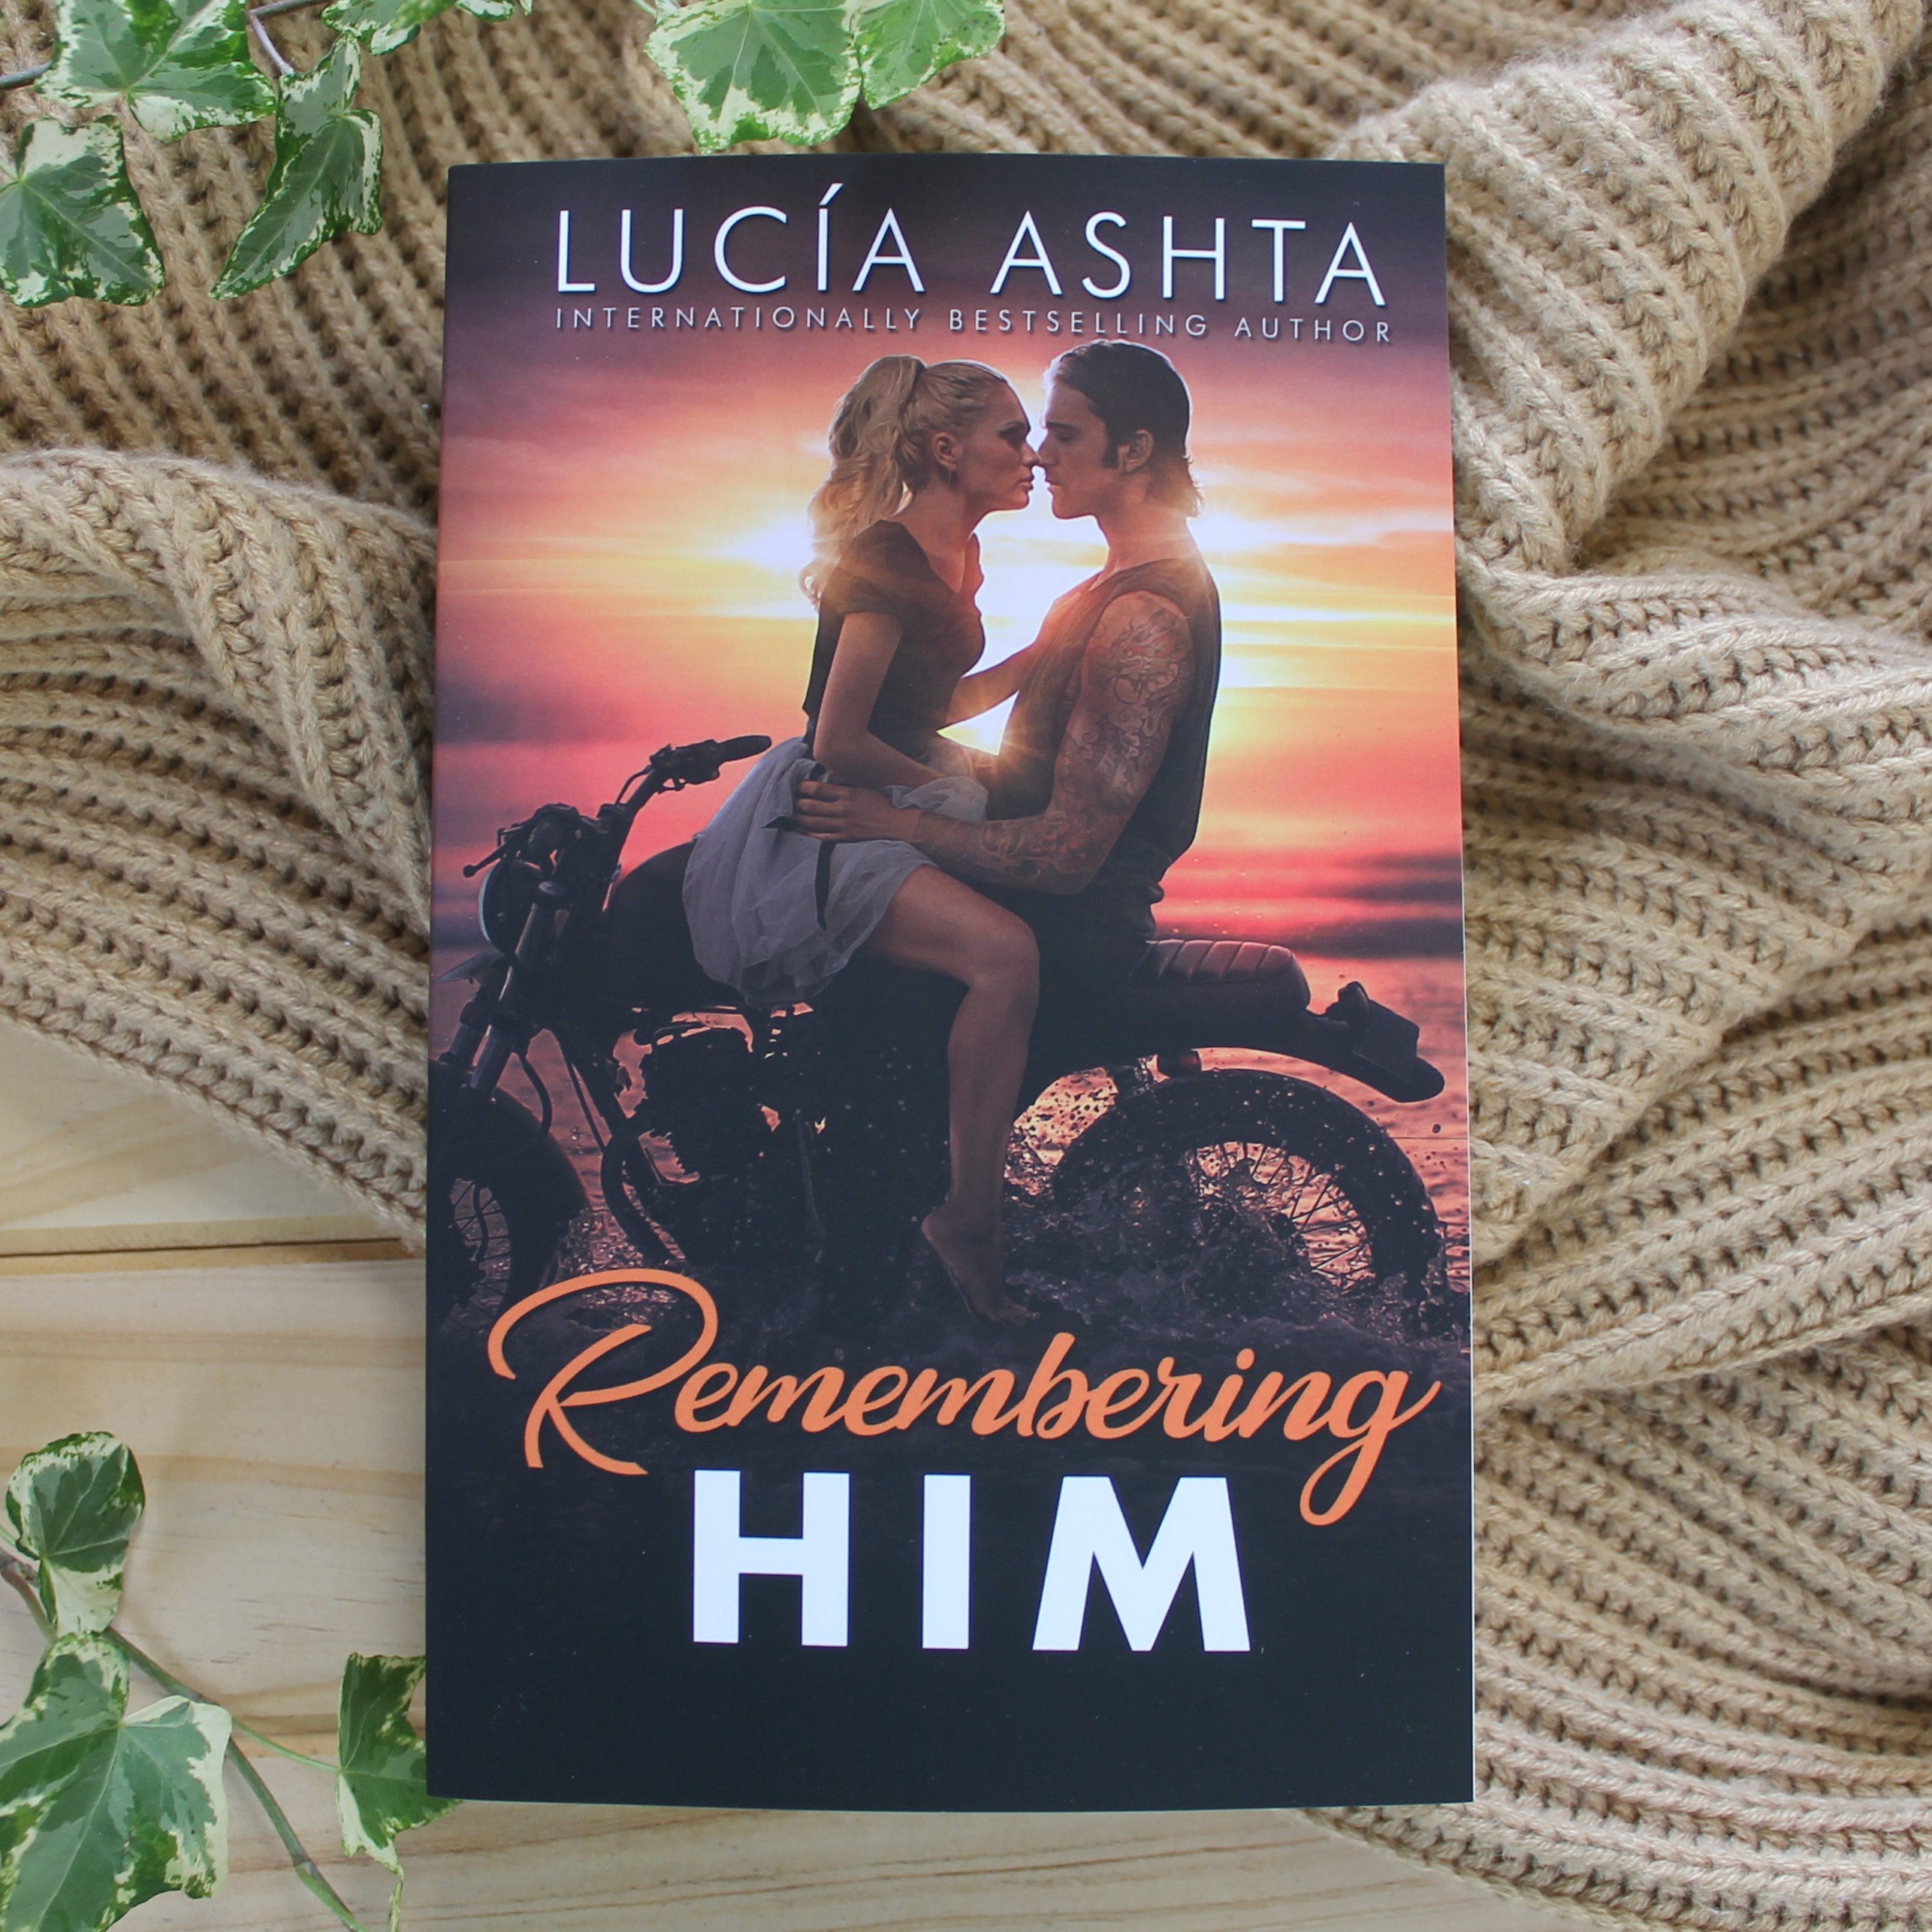 Remembering Him by Lucia Ashta